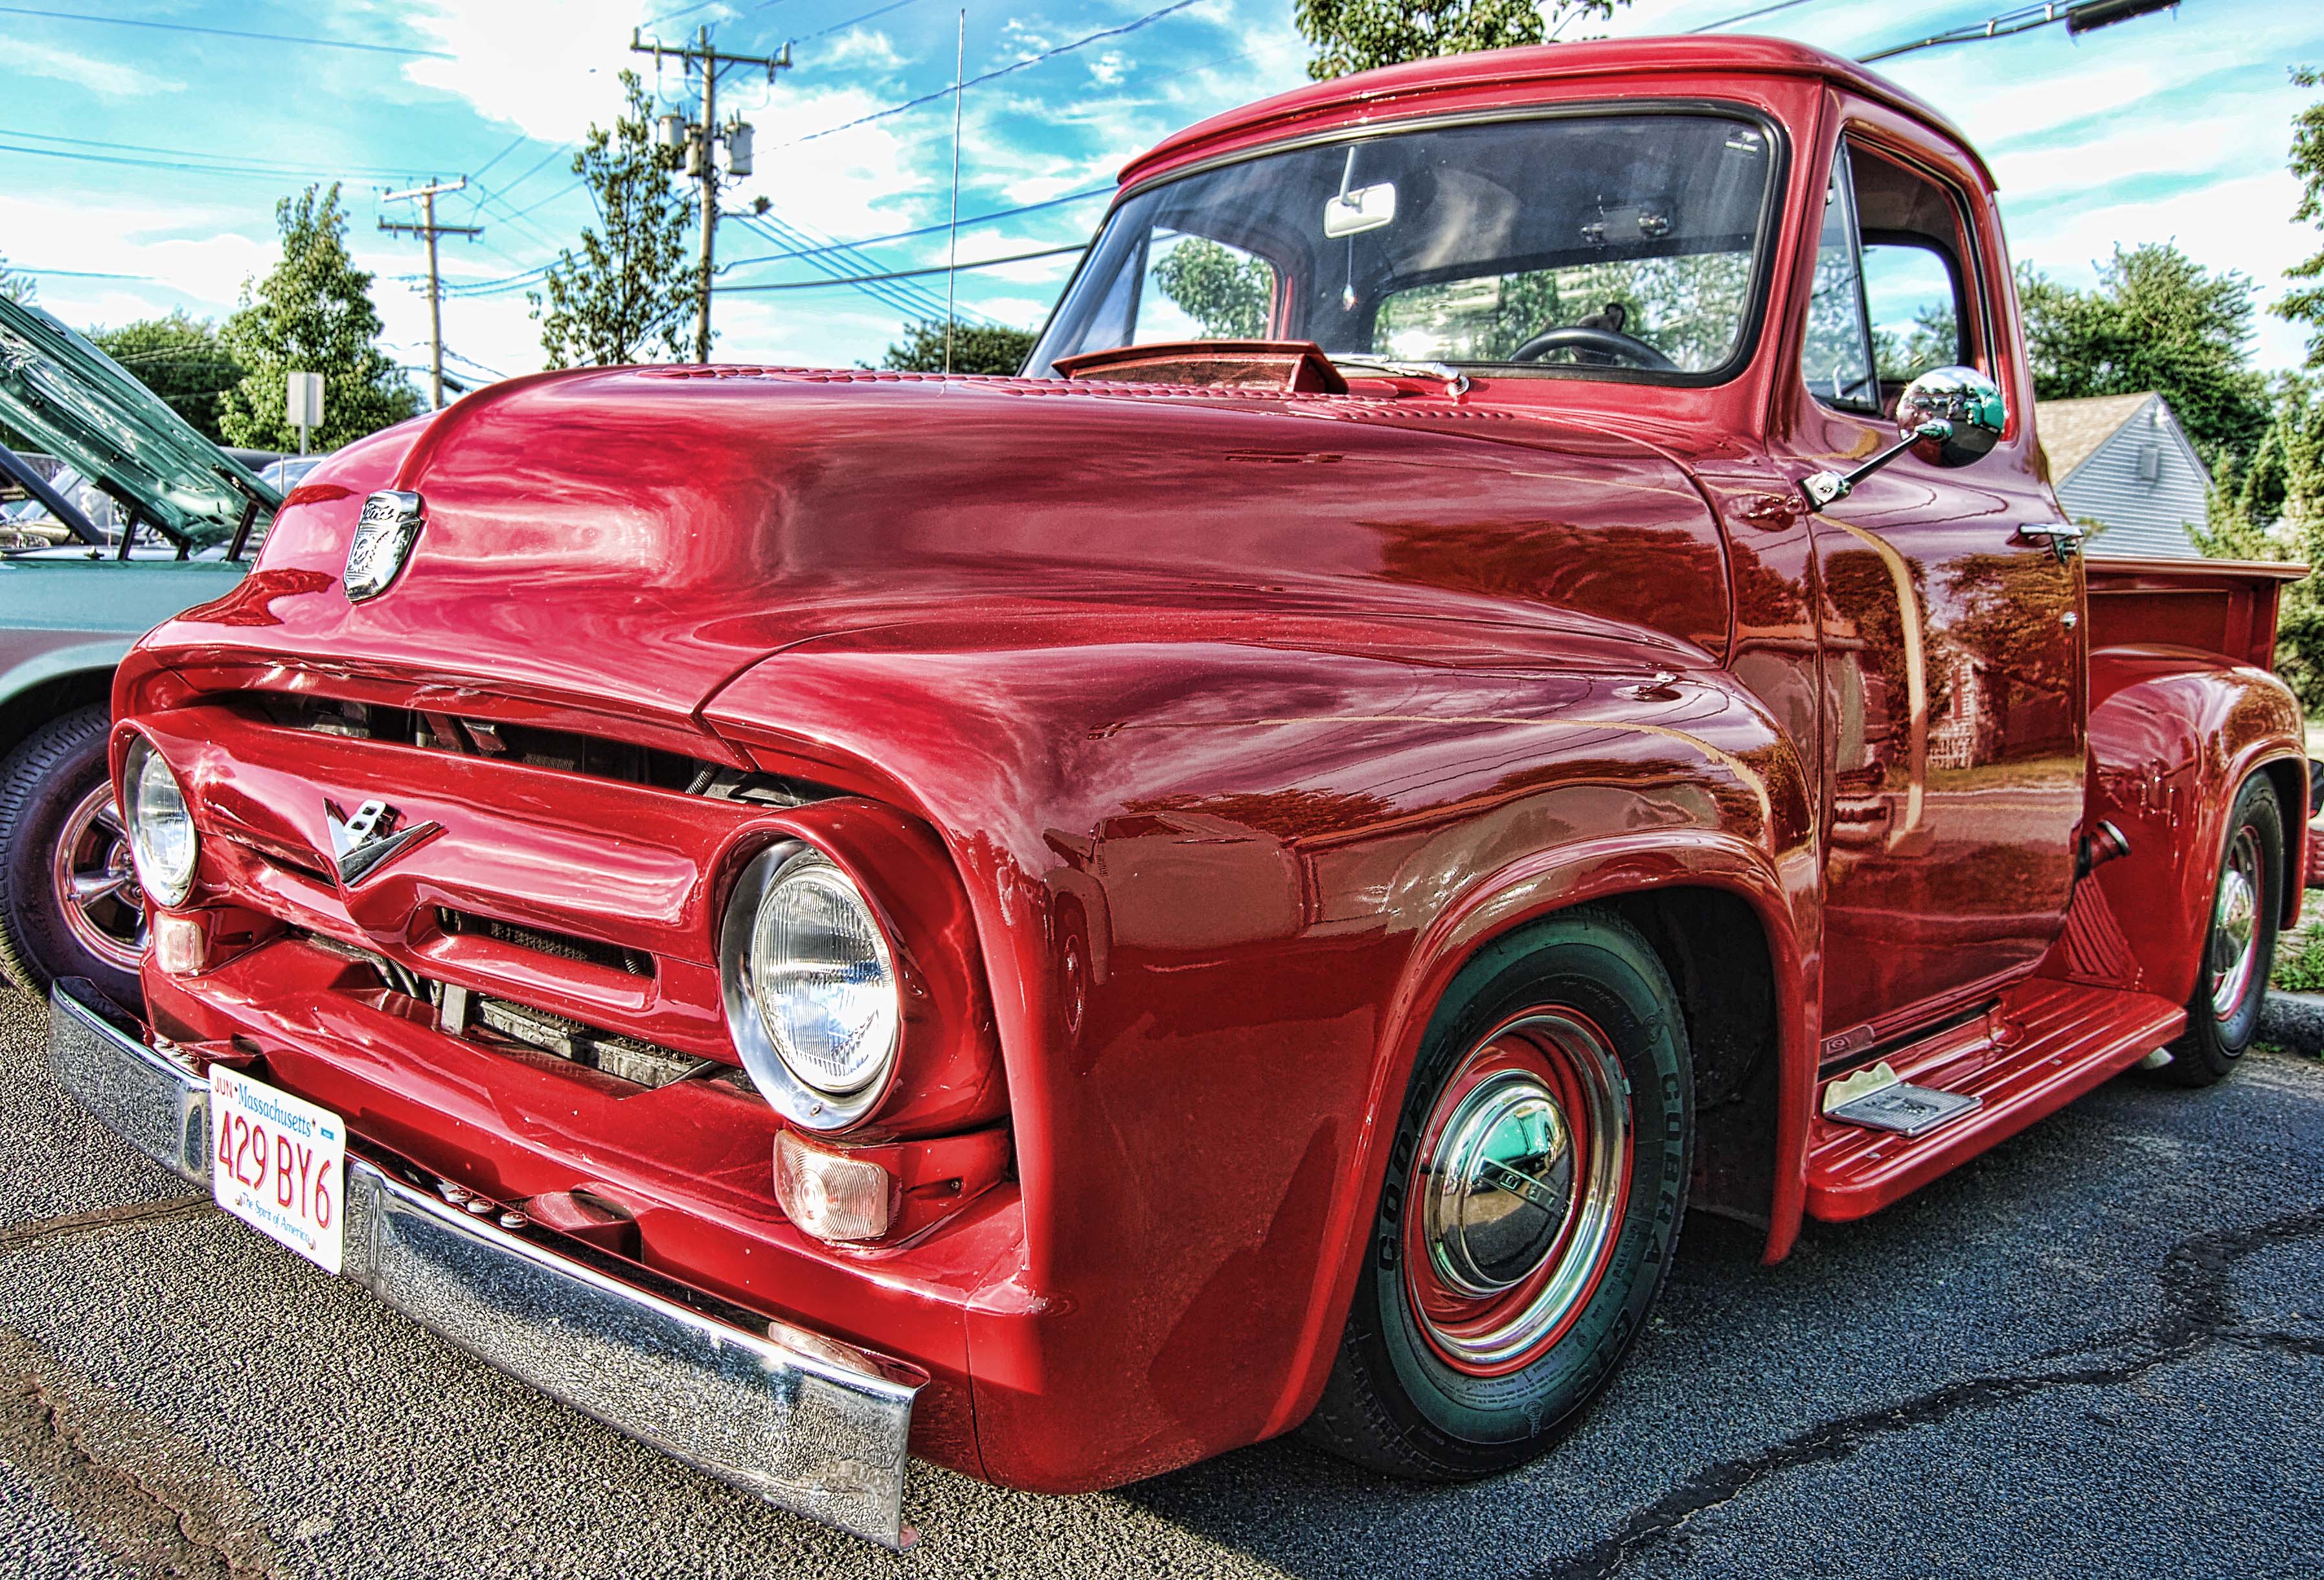 Classic Ford Truck motor pick up truck reviews Car Wallpapers